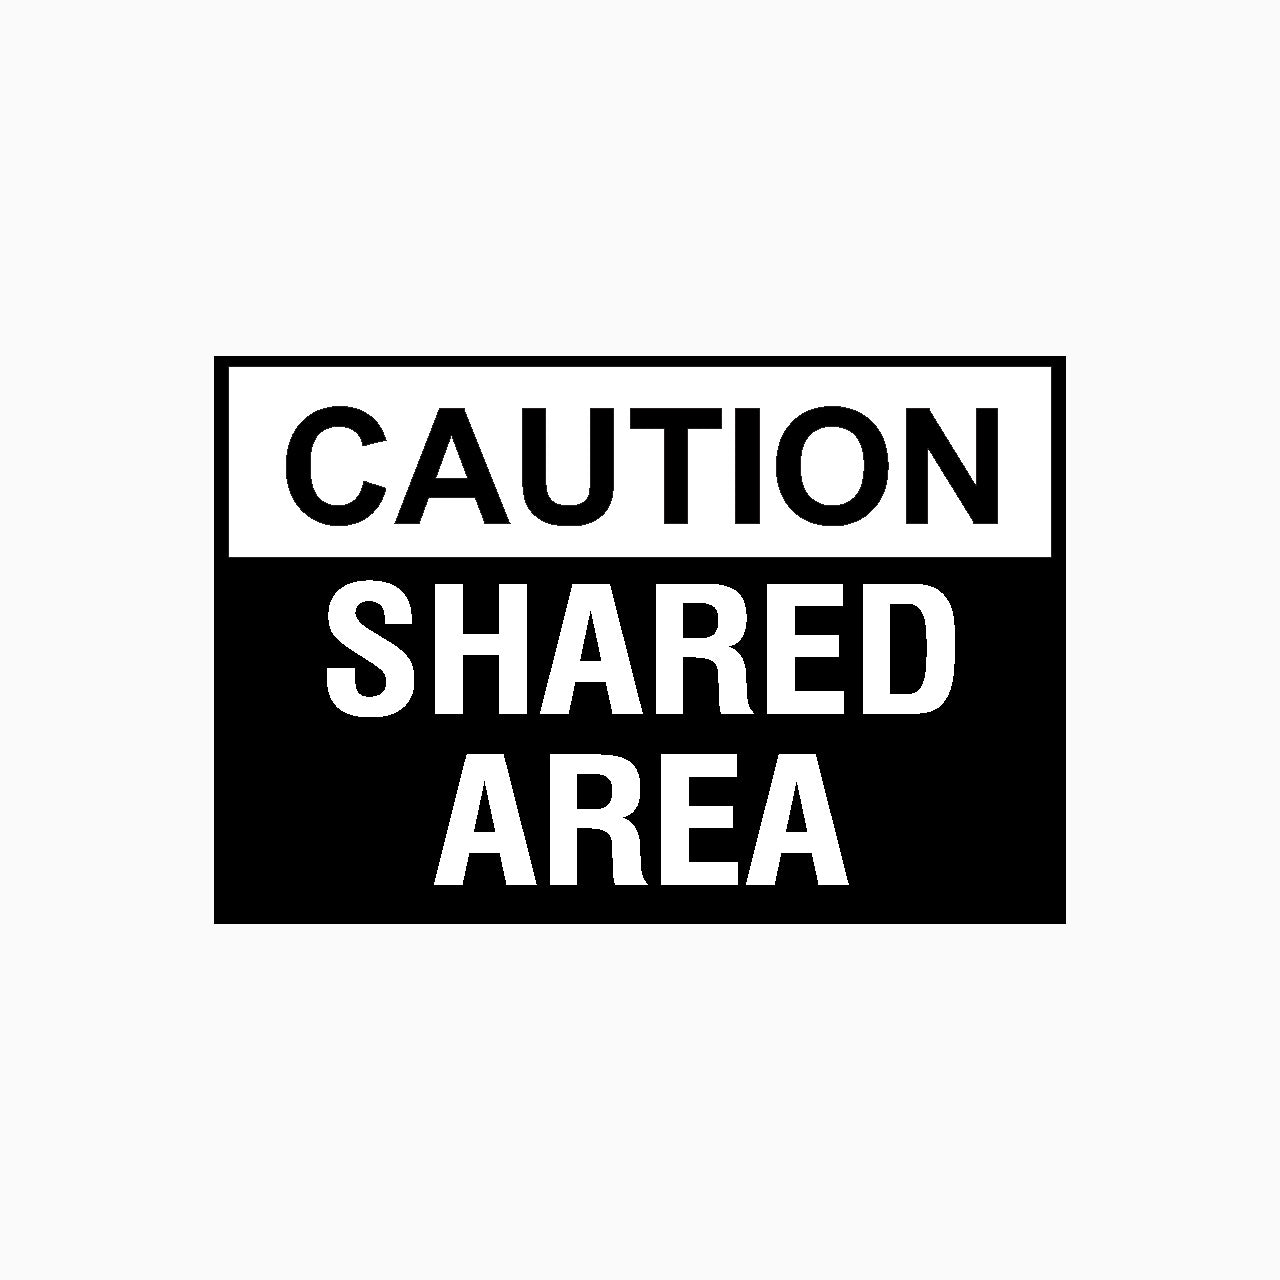 CAUTION SIGN - SHARED AREA SIGN